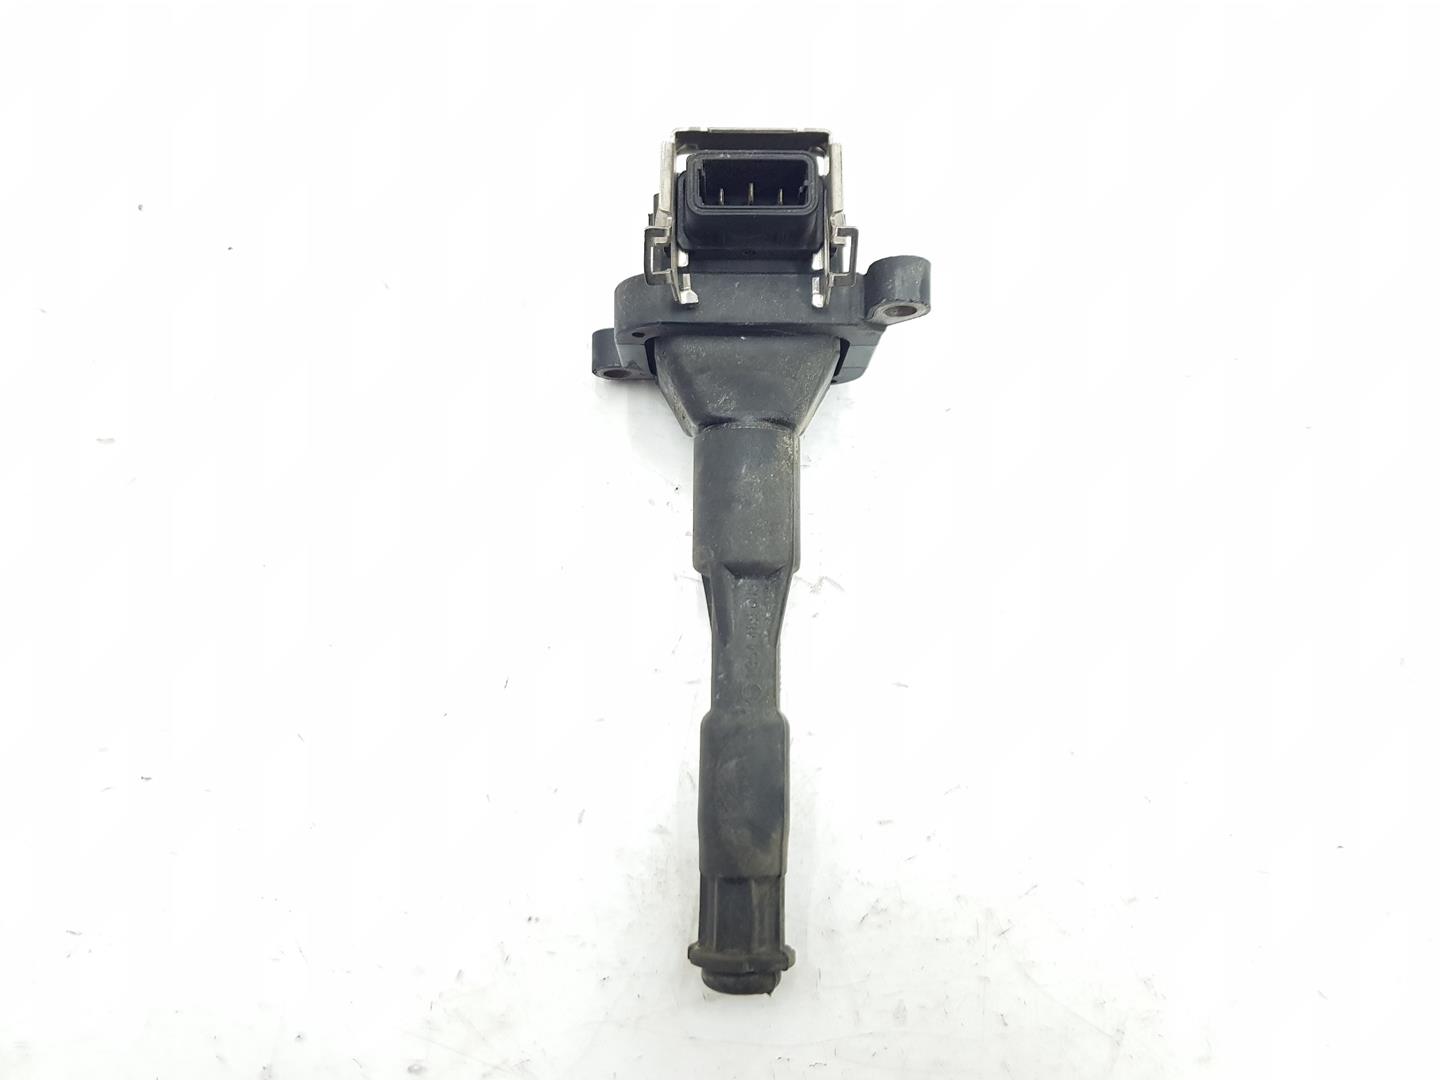 BMW 5 Series E39 (1995-2004) High Voltage Ignition Coil 12131740477, 1703227, 0221504004 19811603